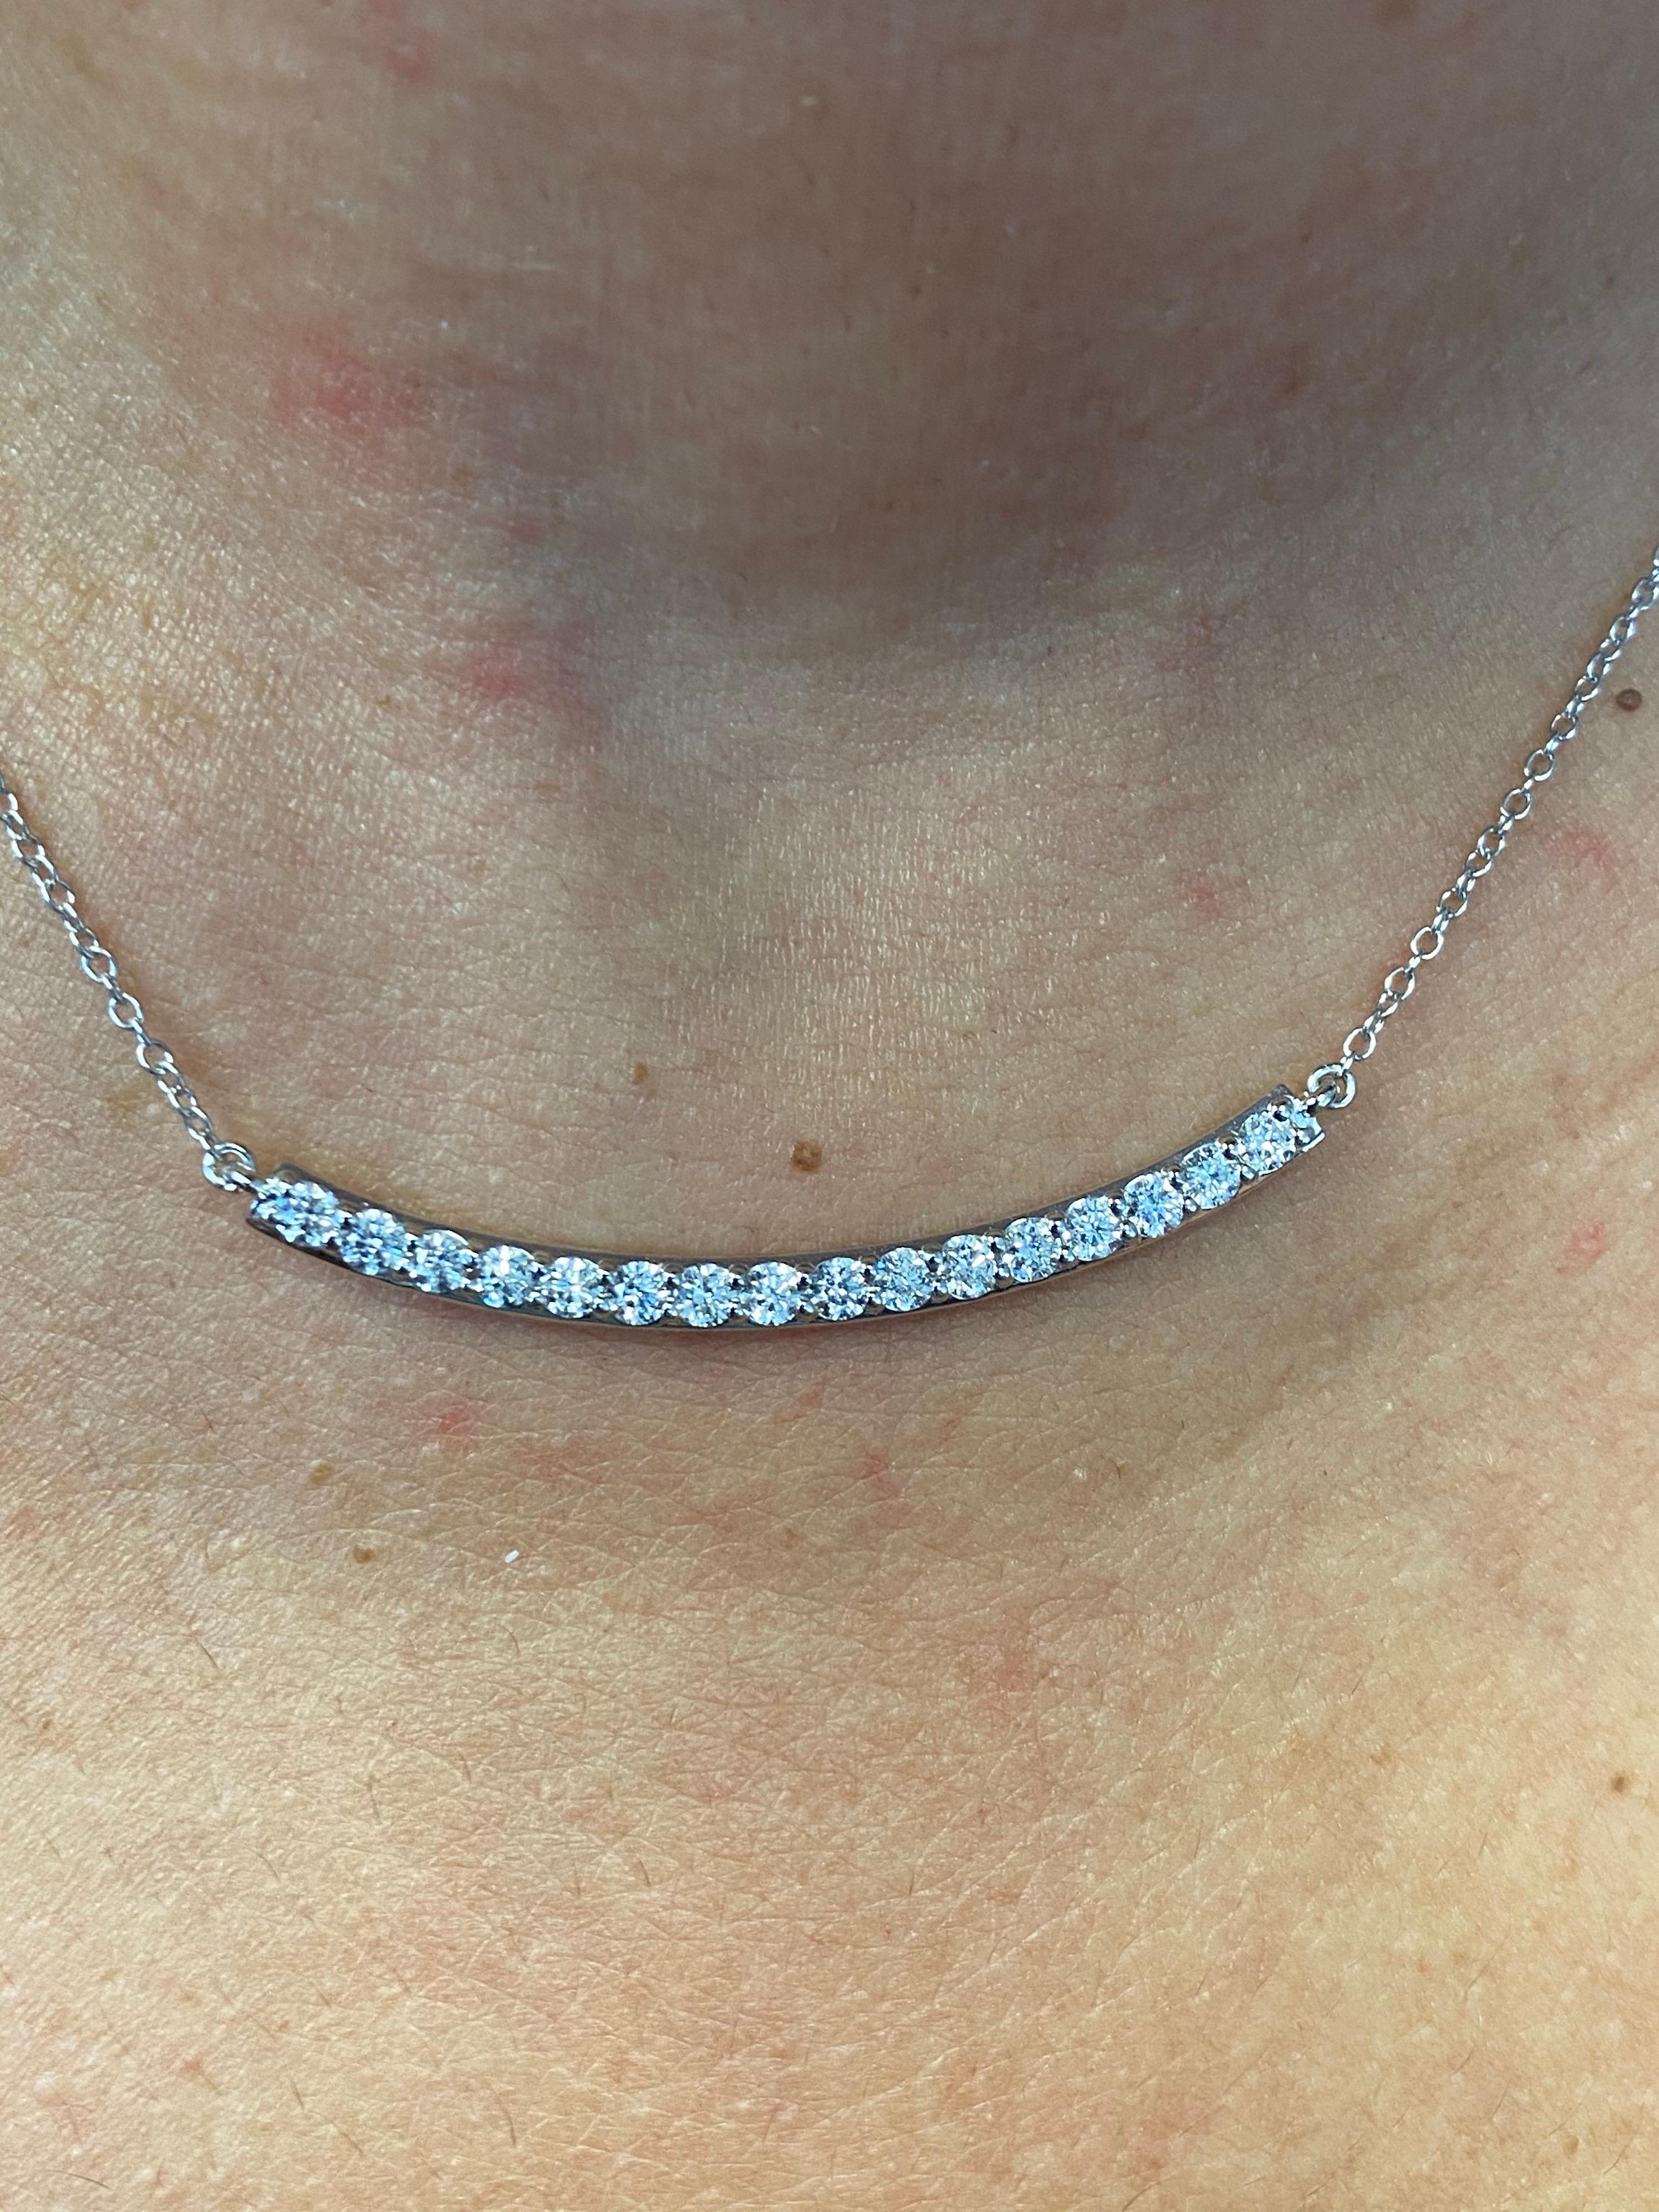 Diamond bar pendant set in 14K white gold. The pendant is set with 16 stones each weighing 0.07 carats. The total diamond weight is 1.12 carats. The stones are G-H, SI clarity. The total length is 16 inches.